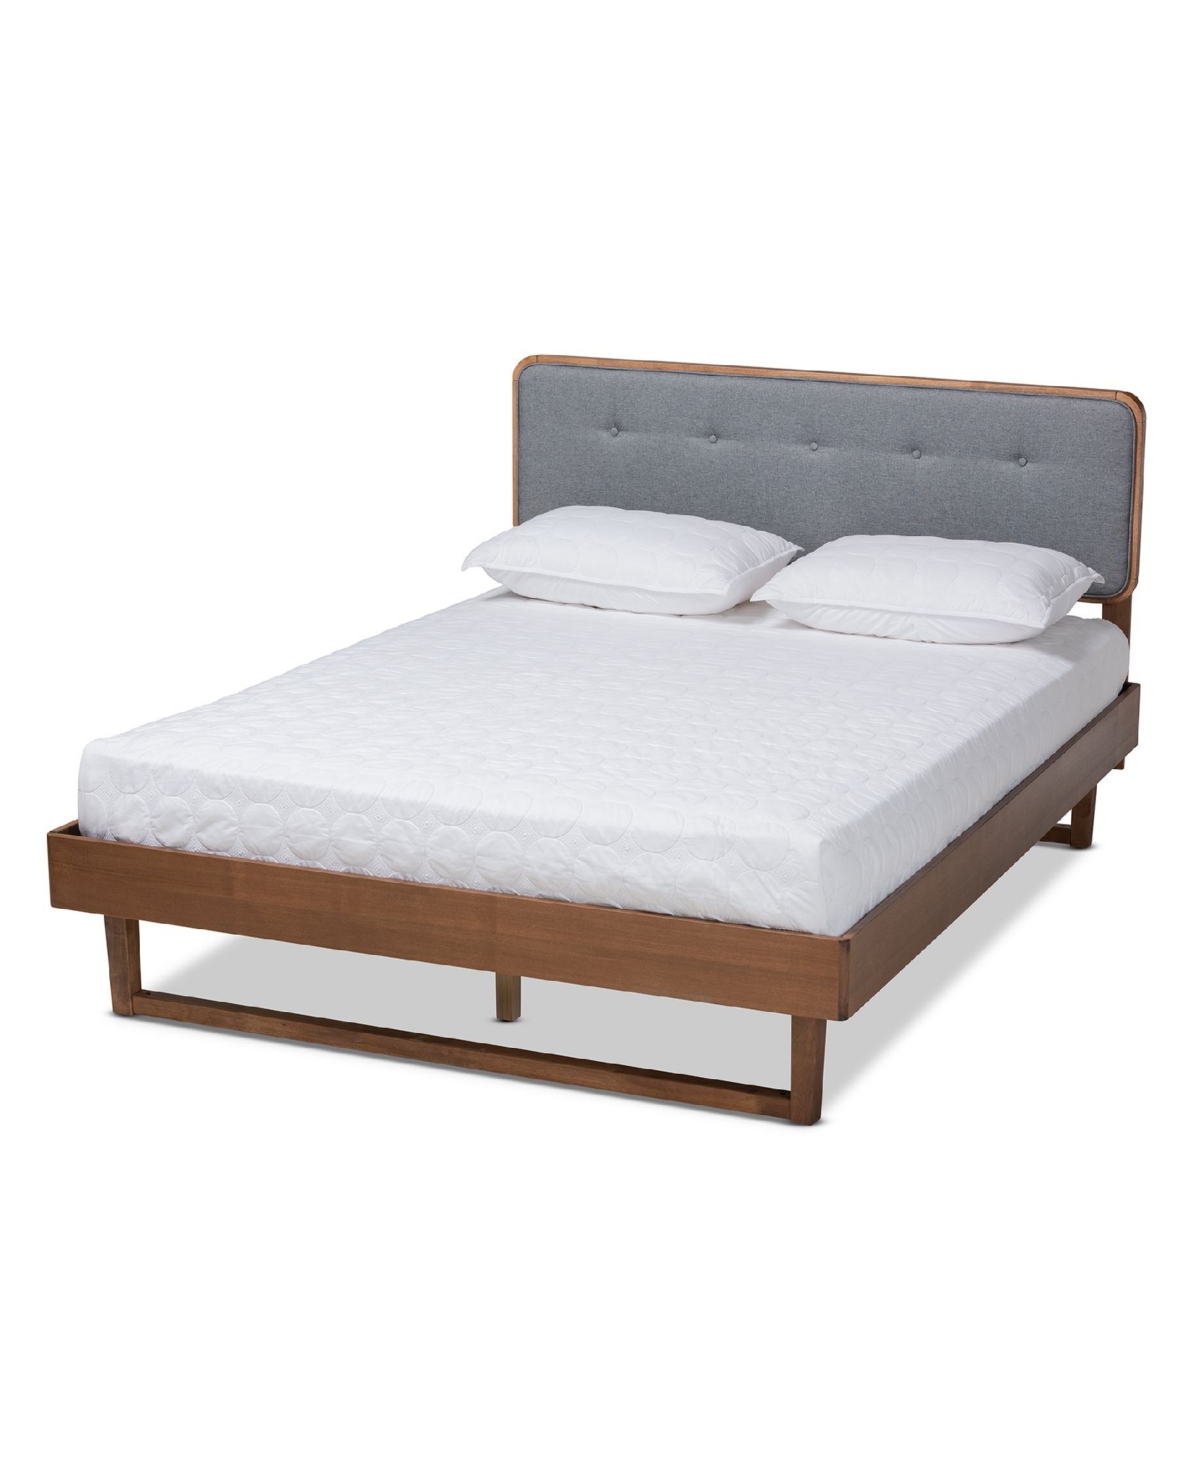 Natalia Mid-Century Modern Fabric Upholstered Queen Size Platform Bed